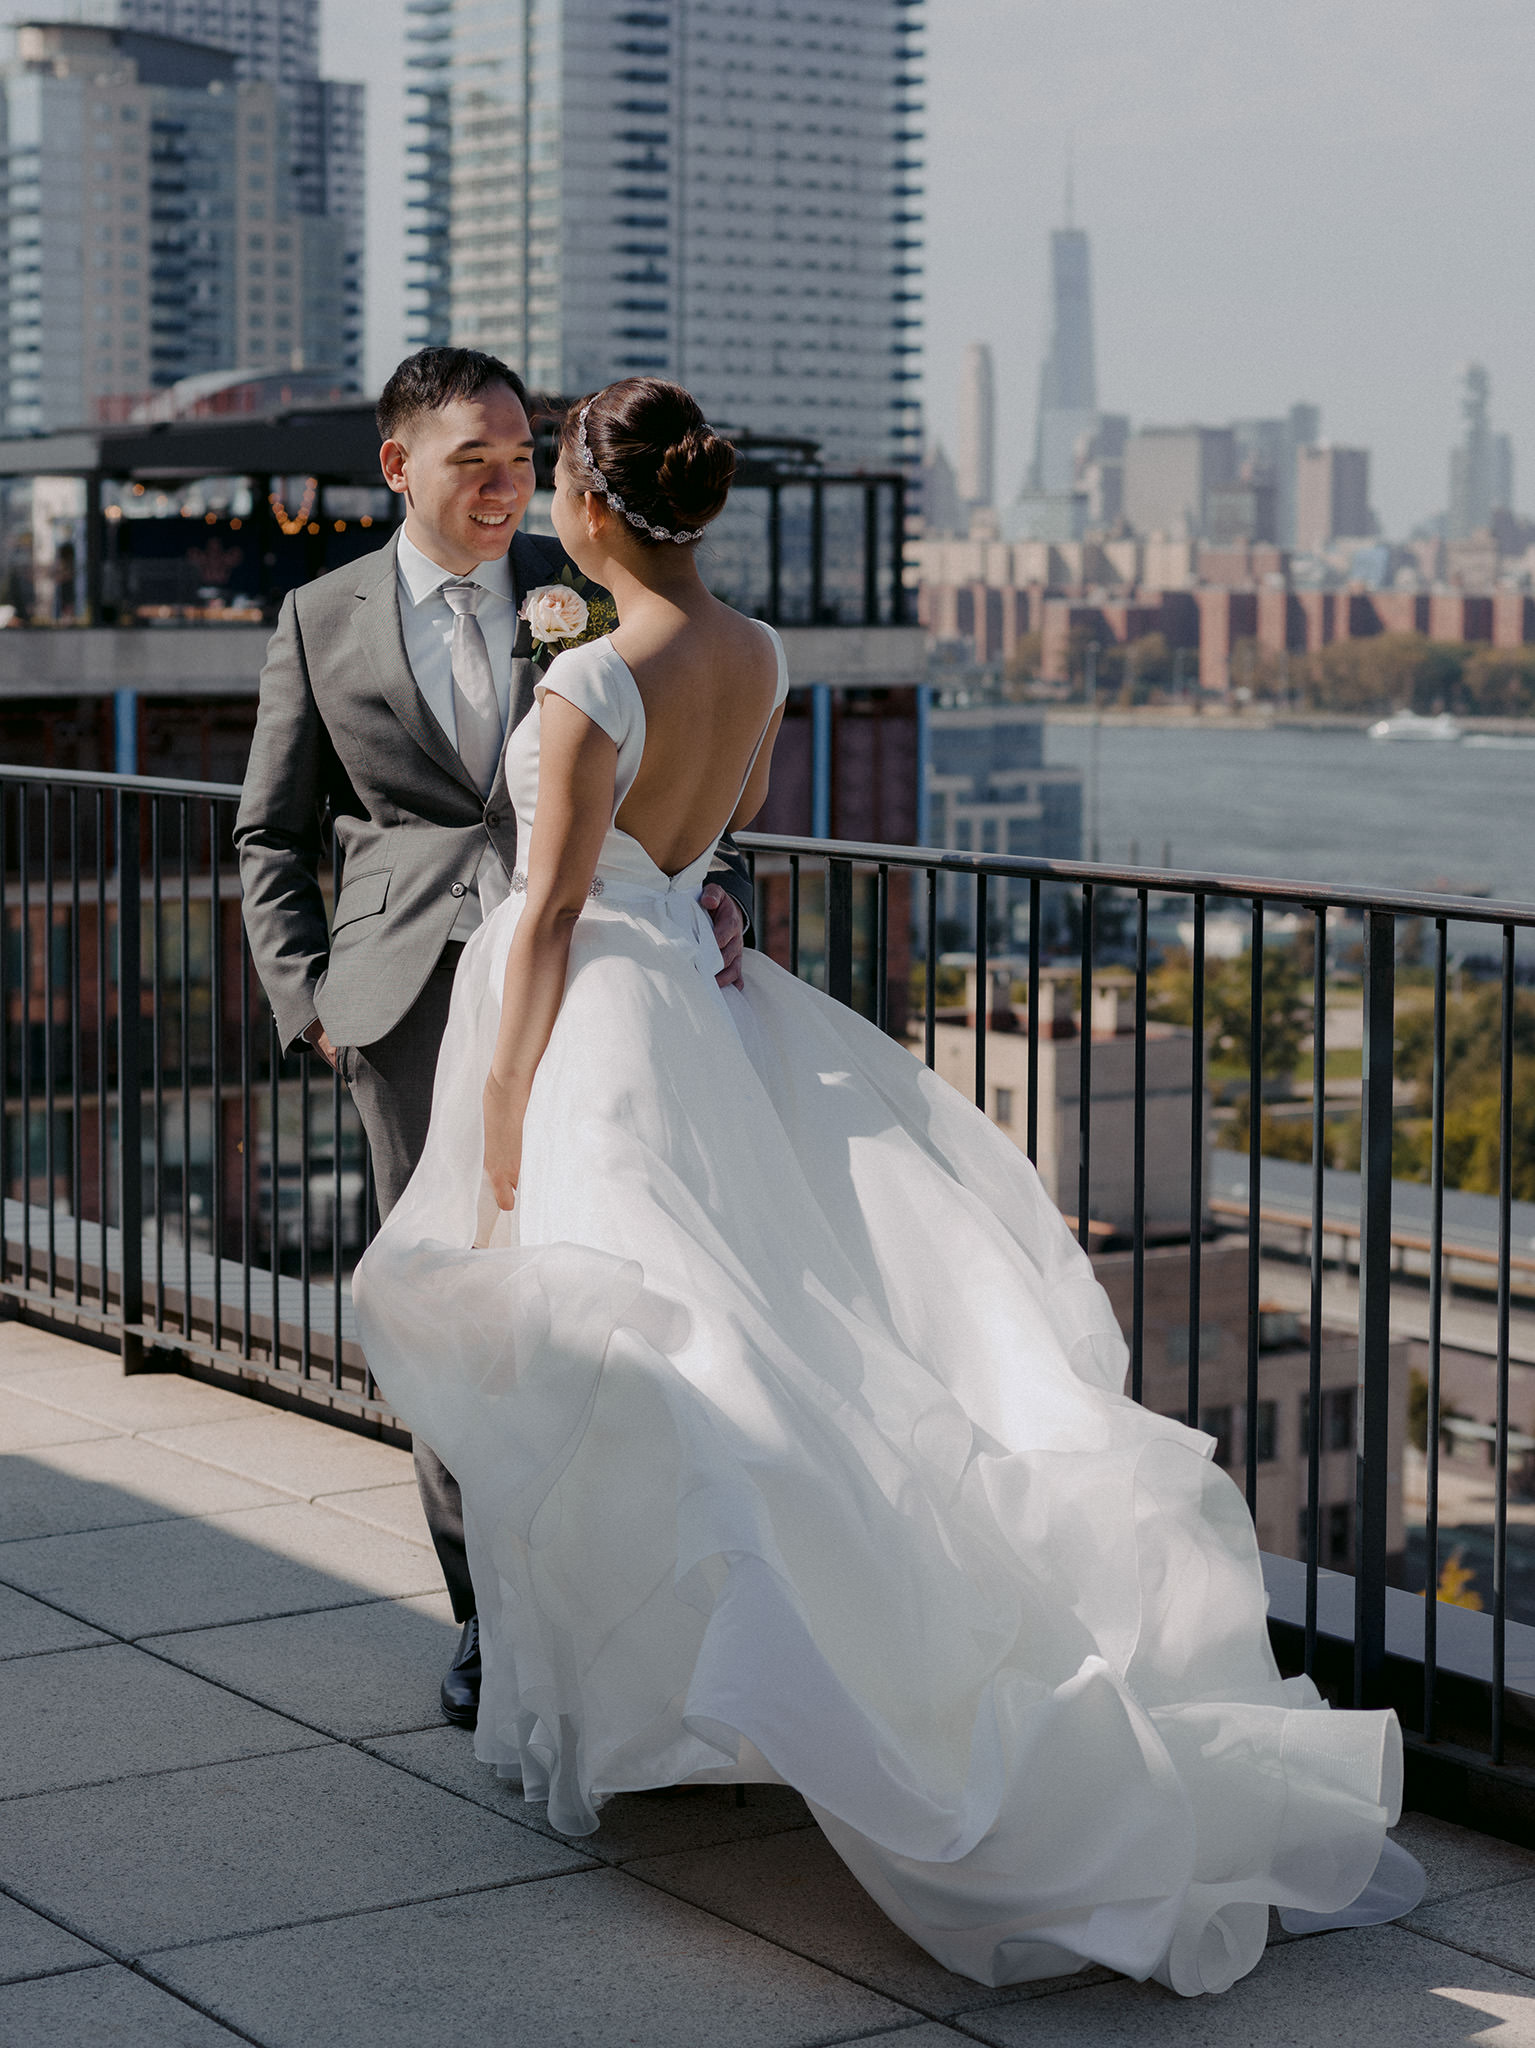 groom looking at his bride on their wedding day at the Wythe Hotel rooftop with One World Trade in the background; bride's dress is flowing in the wind